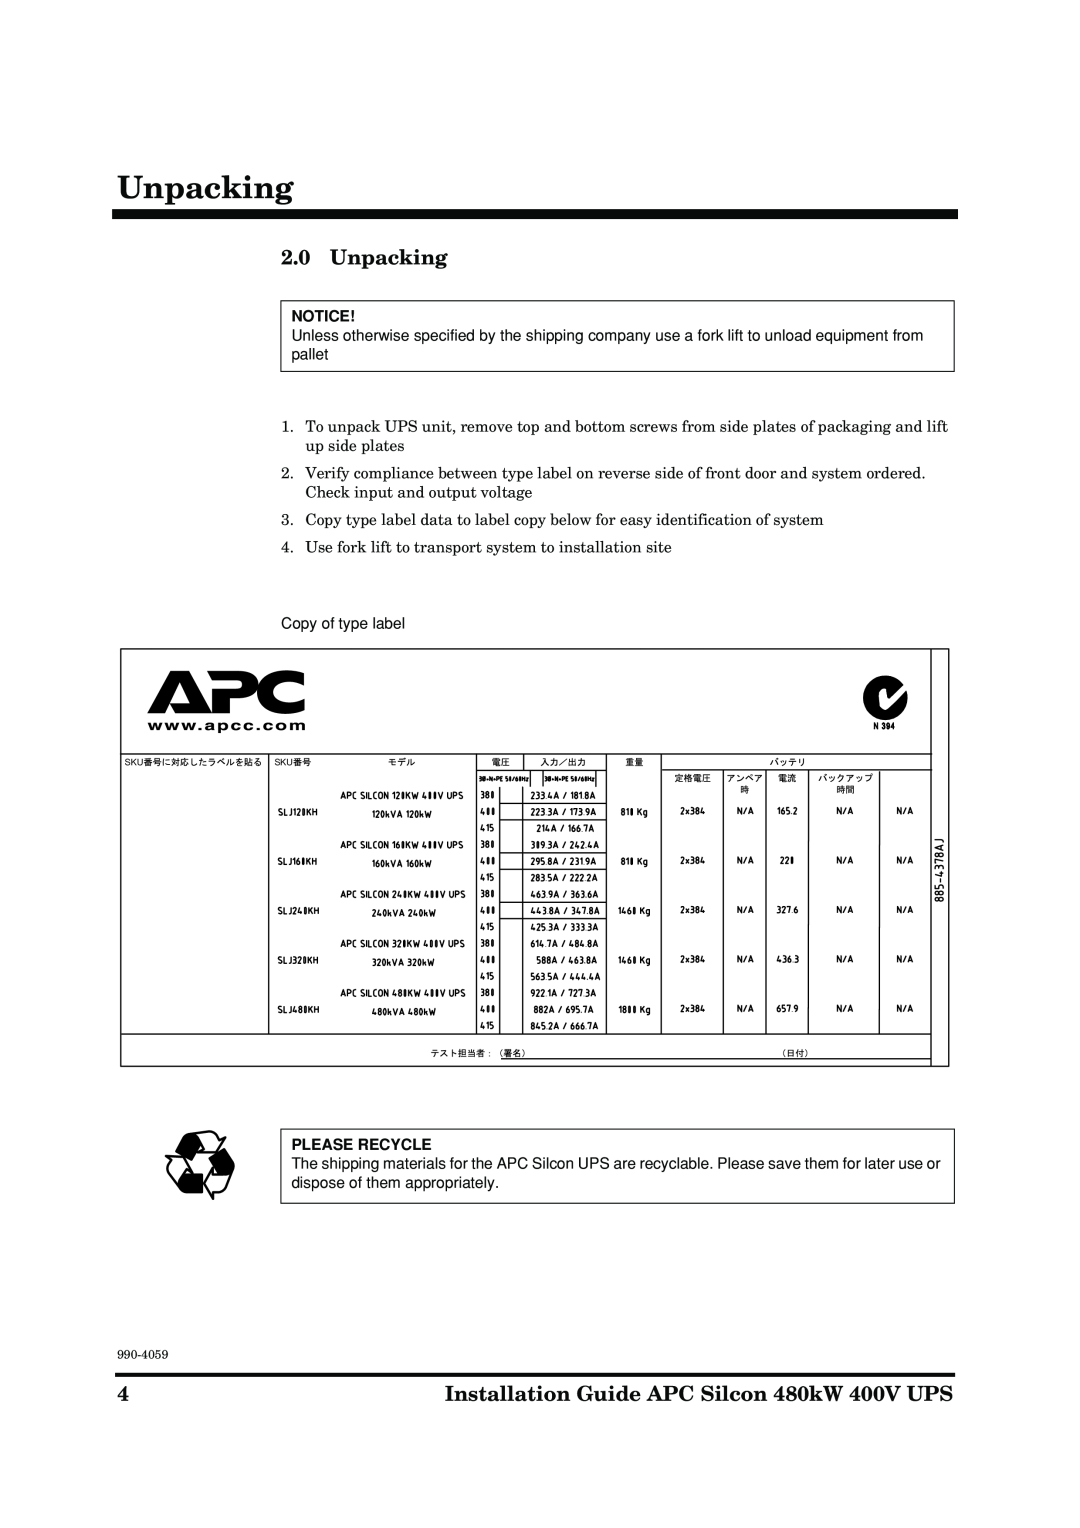 American Power Conversion manual Unpacking, Installation Guide APC Silcon 480kW 400V UPS, Please Recycle 